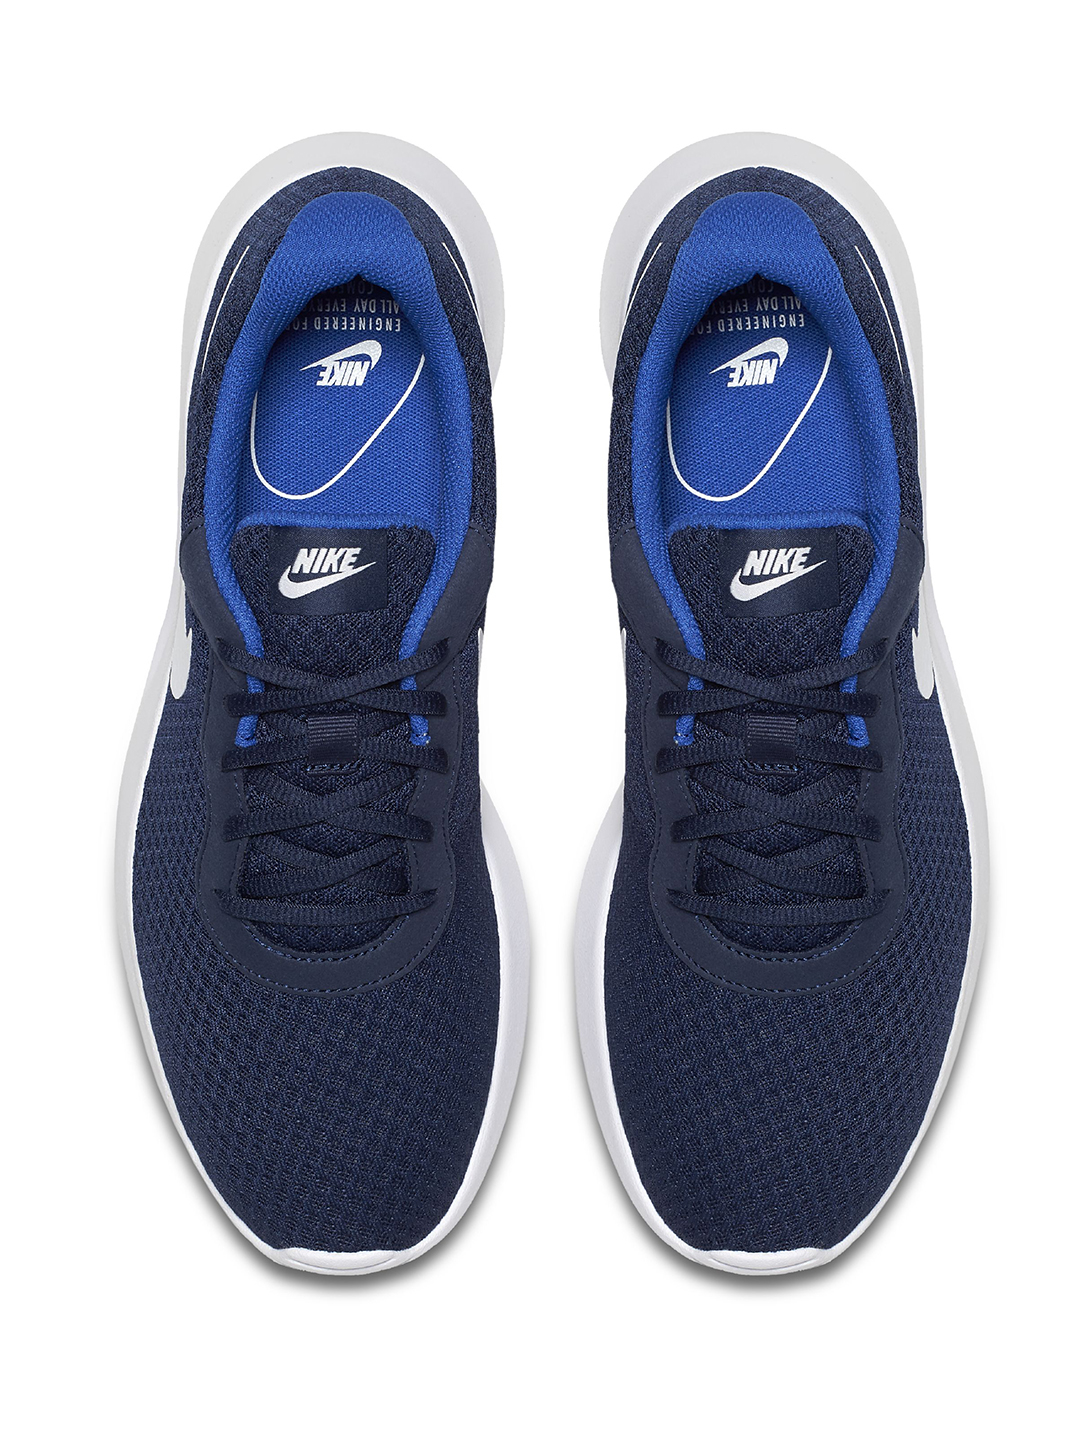 myntra nike shoes off 64% -